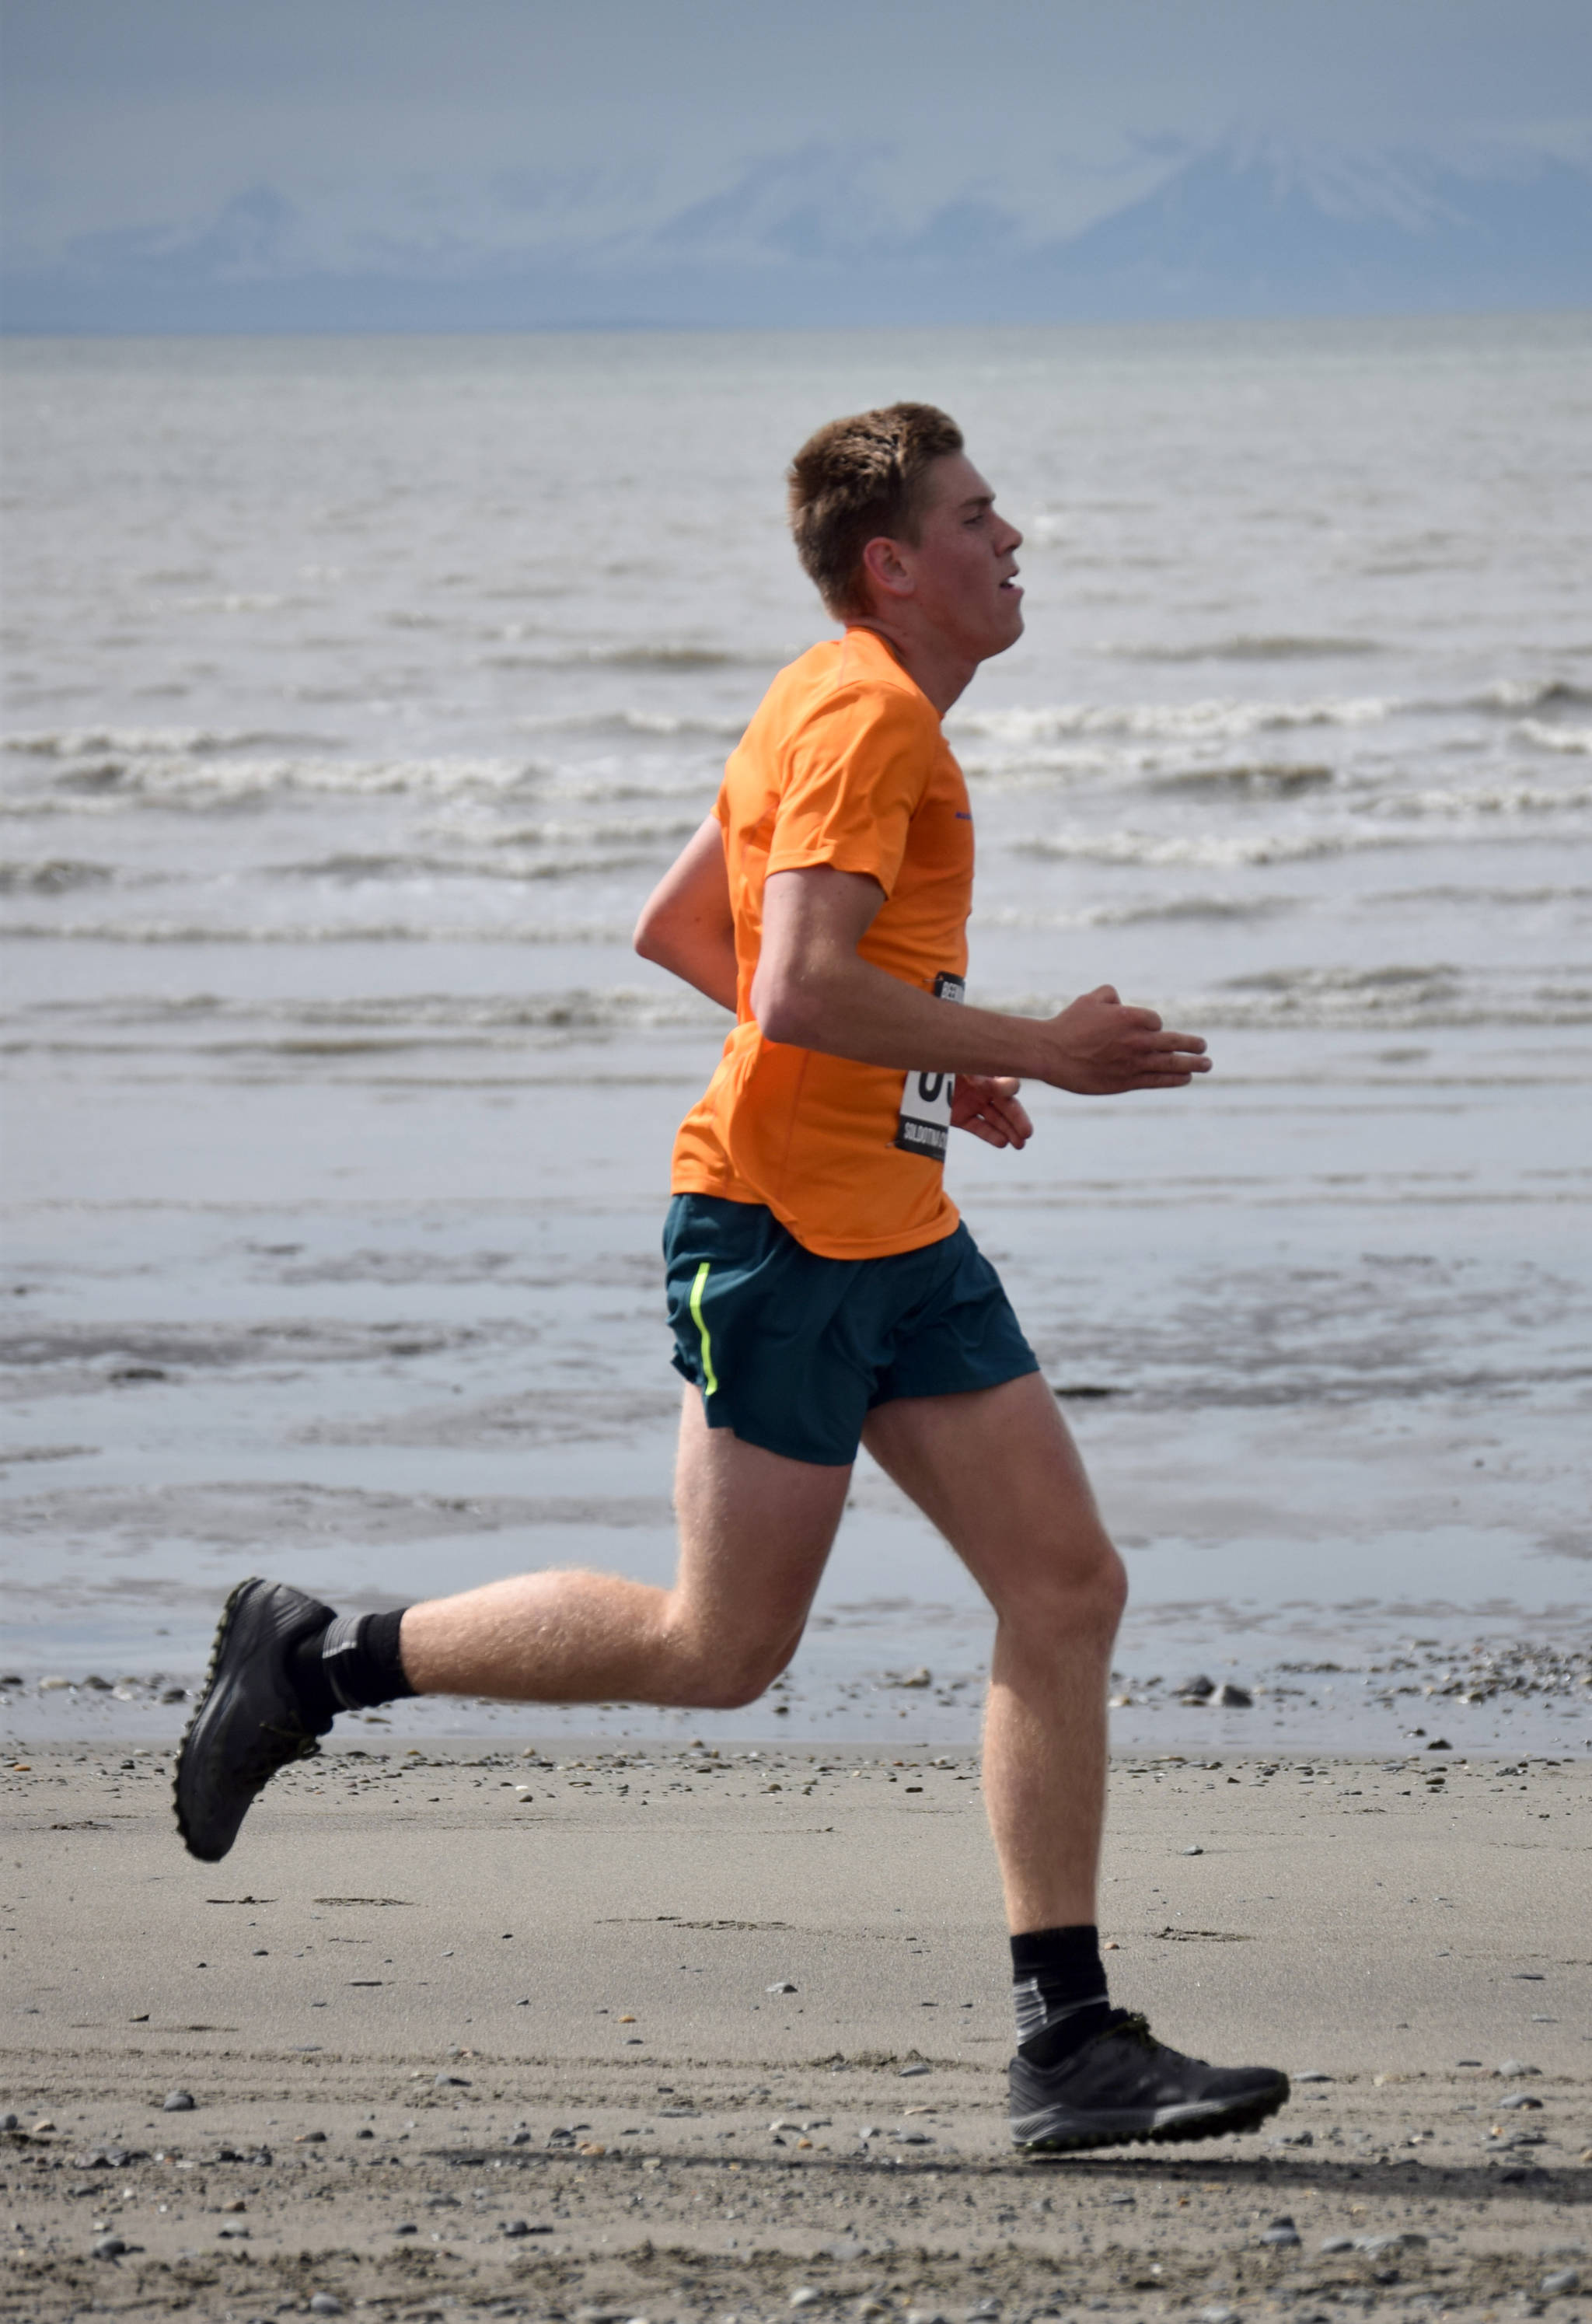 Will Steffe runs to victory in the 10-miler at the Mouth to Mouth Wild Run and Ride on Monday, May 27, 2019, at the beach in Kenai. Alaska. (Photo by Jeff Helminiak/Peninsula Clarion)